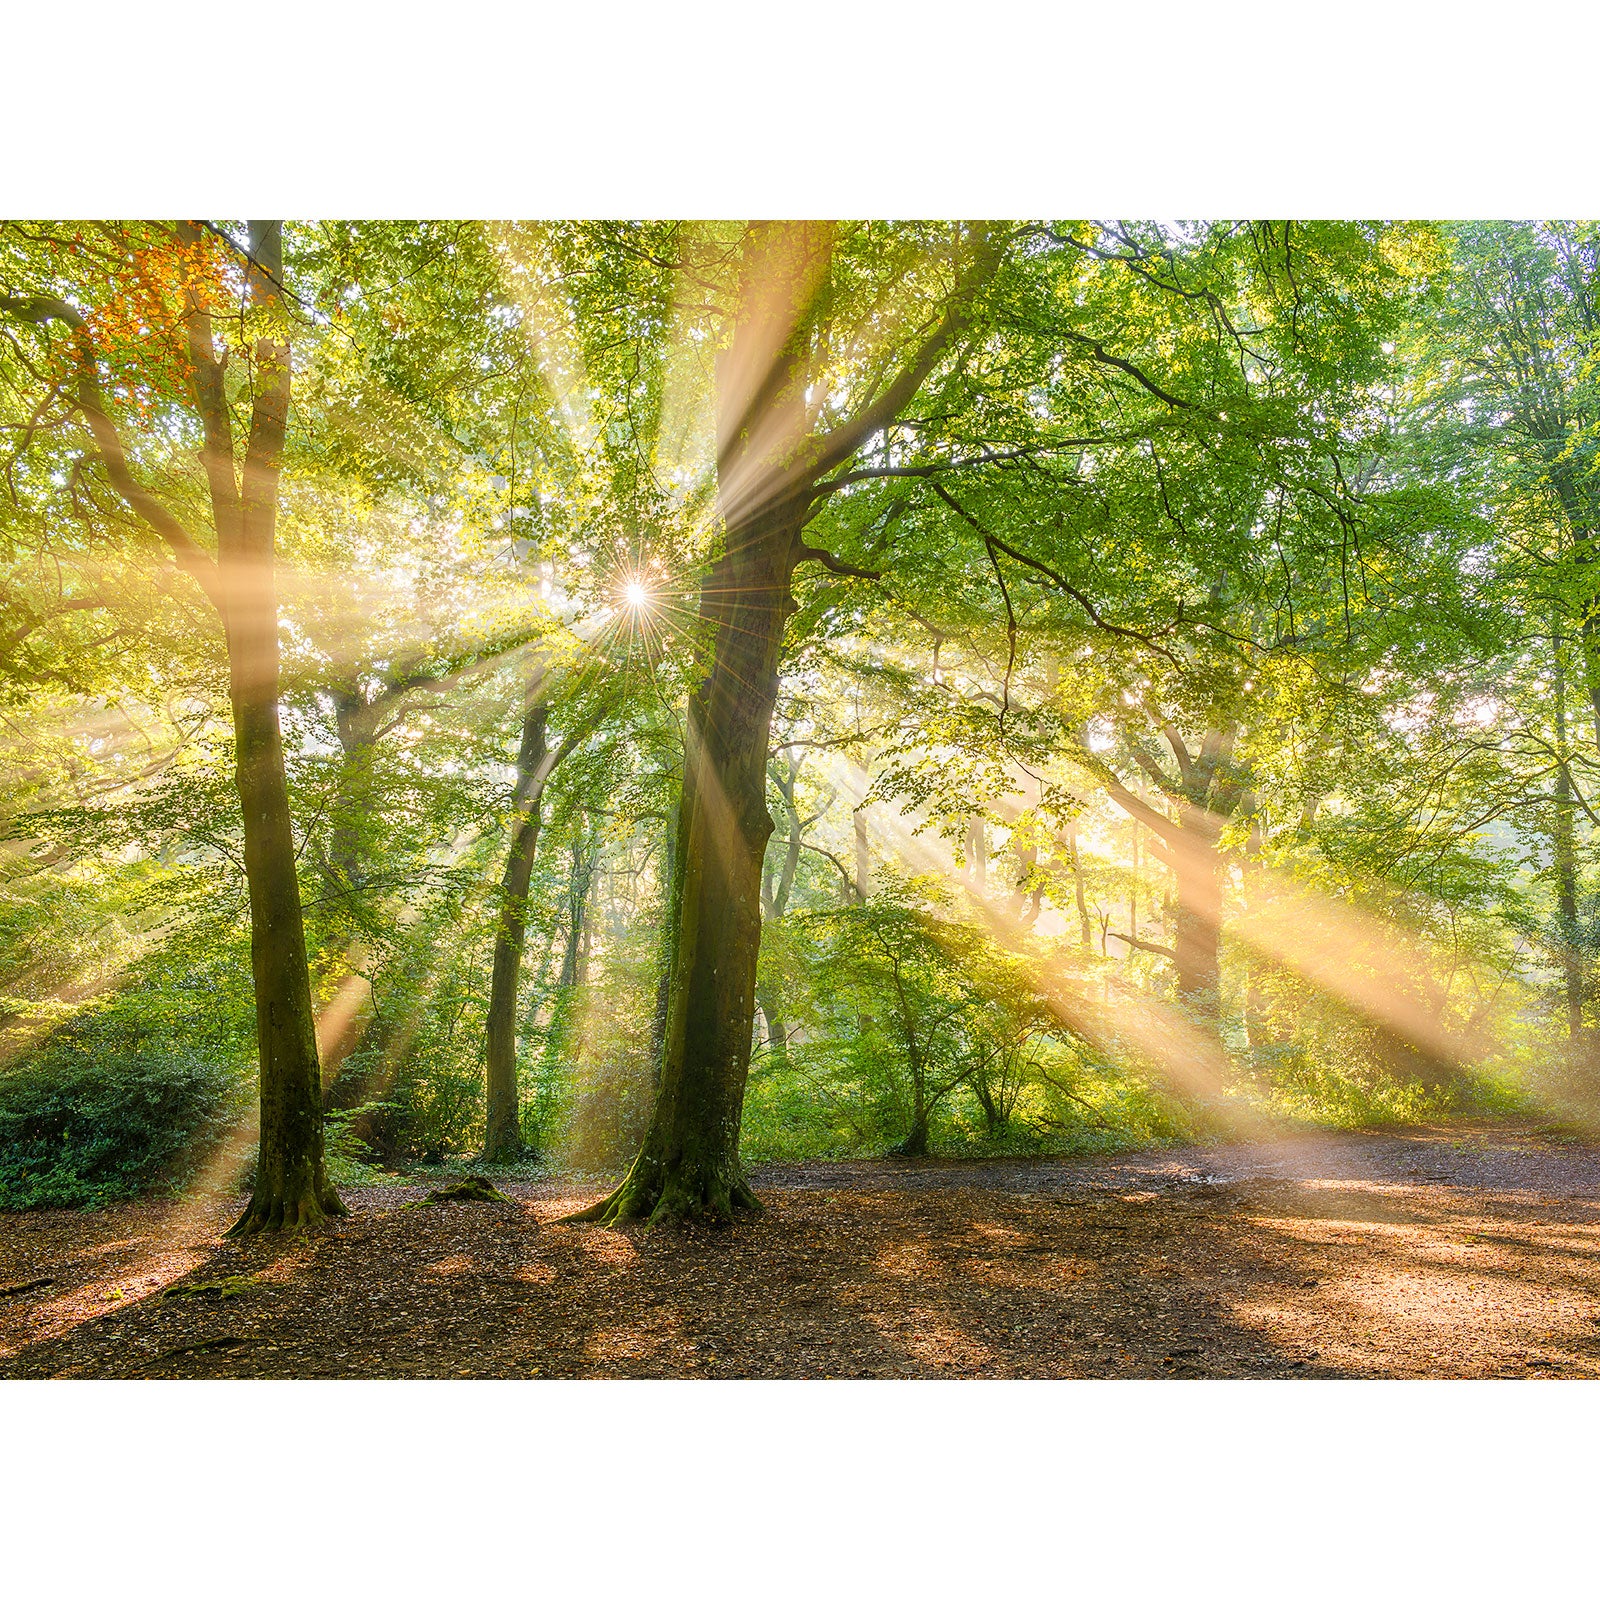 Sunlight streaming through Borthwood Copse forest on the Isle of Wight on a hazy morning by Available Light Photography.